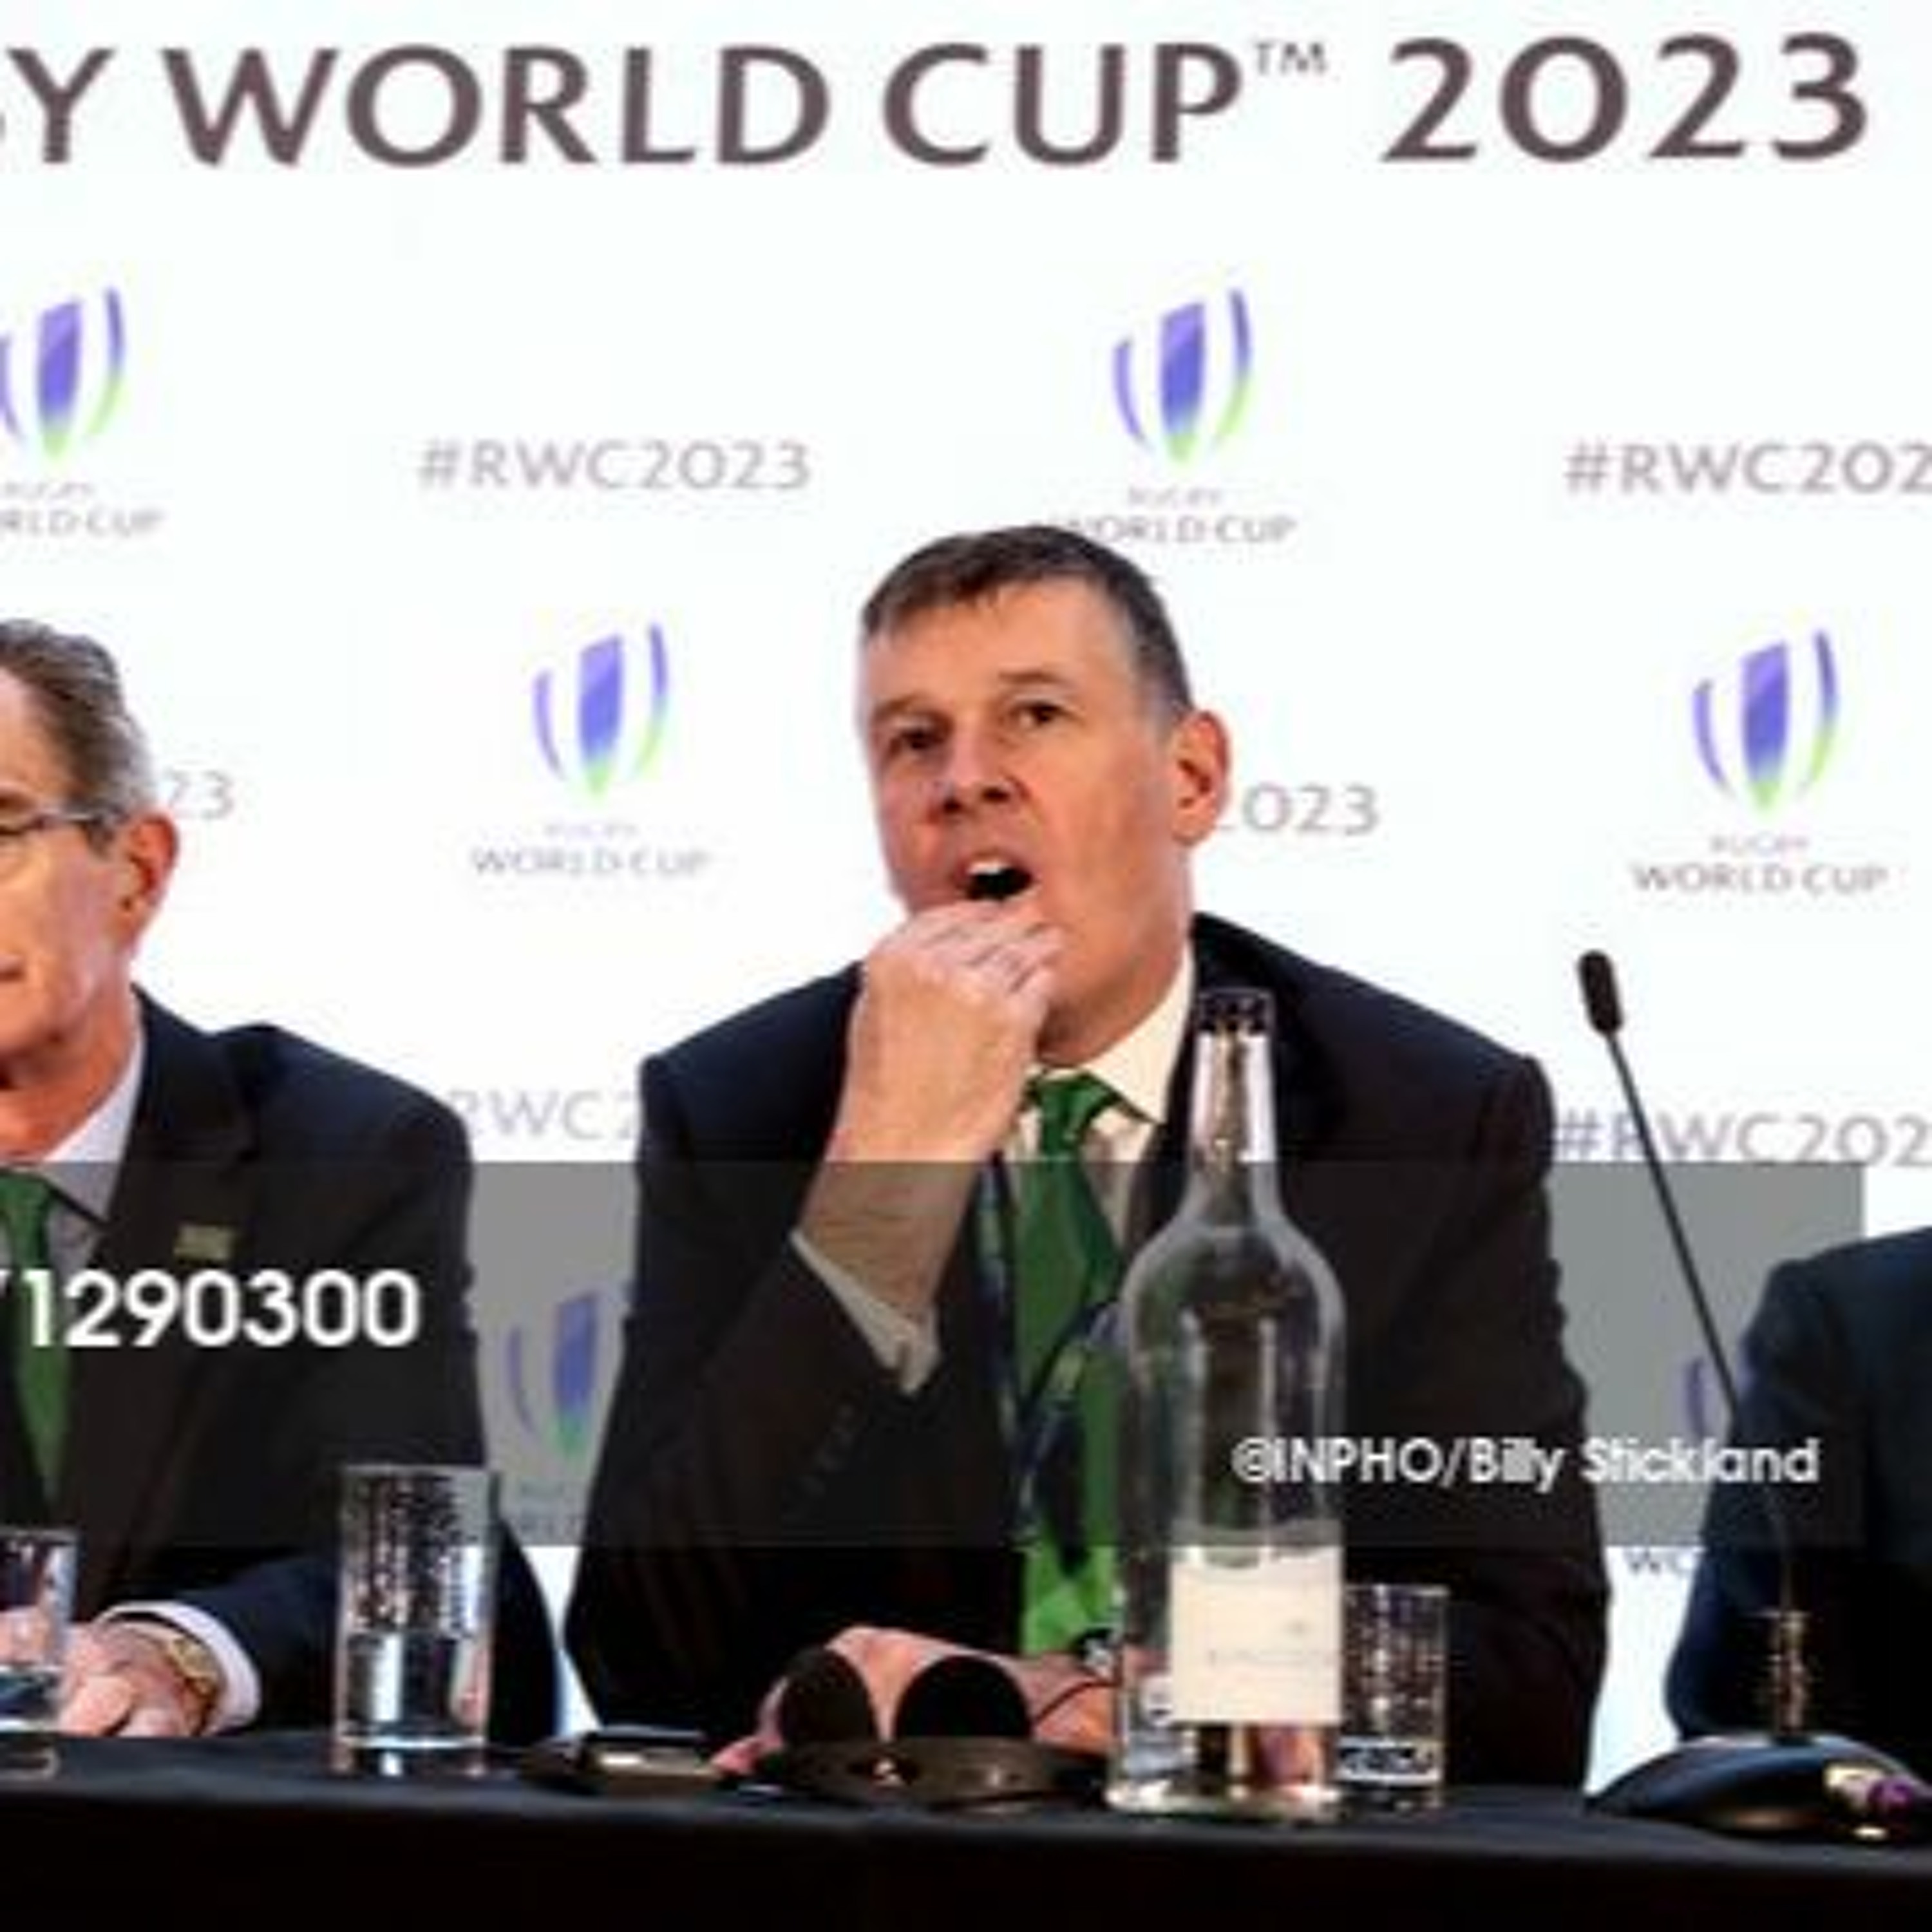 Ireland lose out on hosting RWC 2023 - Craggy Rugby podcast